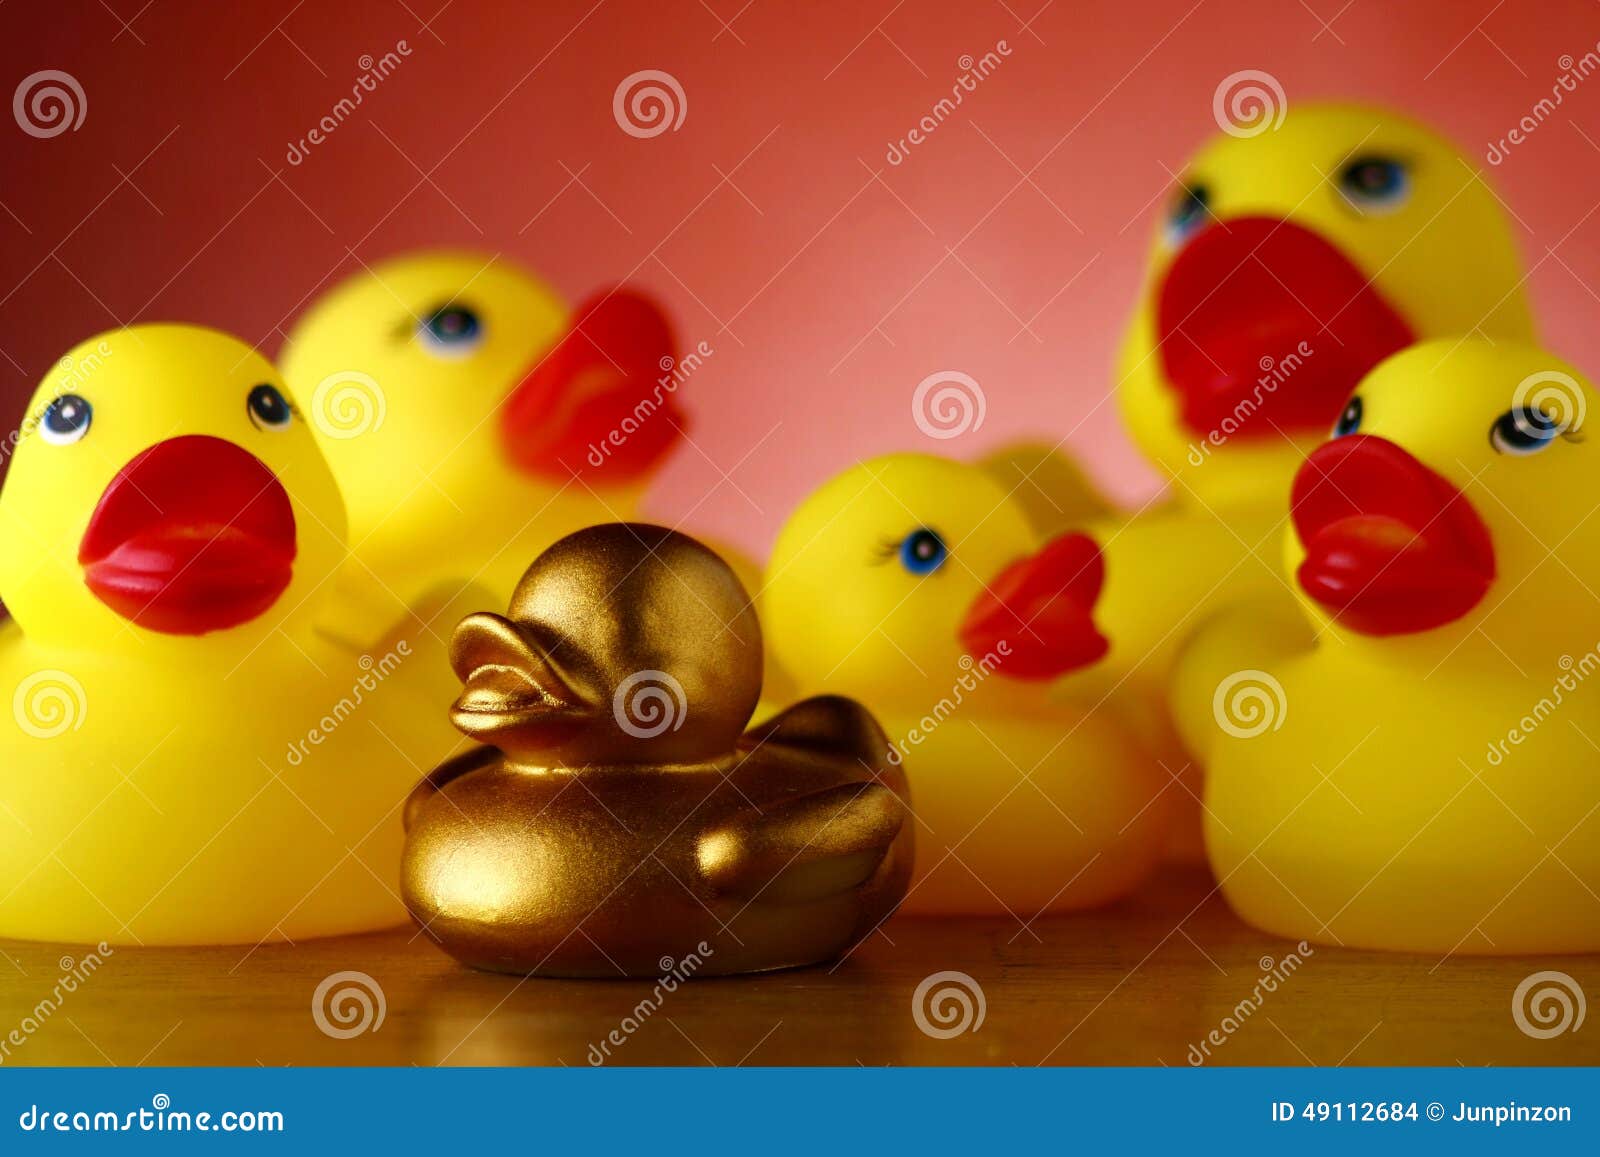 rubber duckies and golden rubber duckling